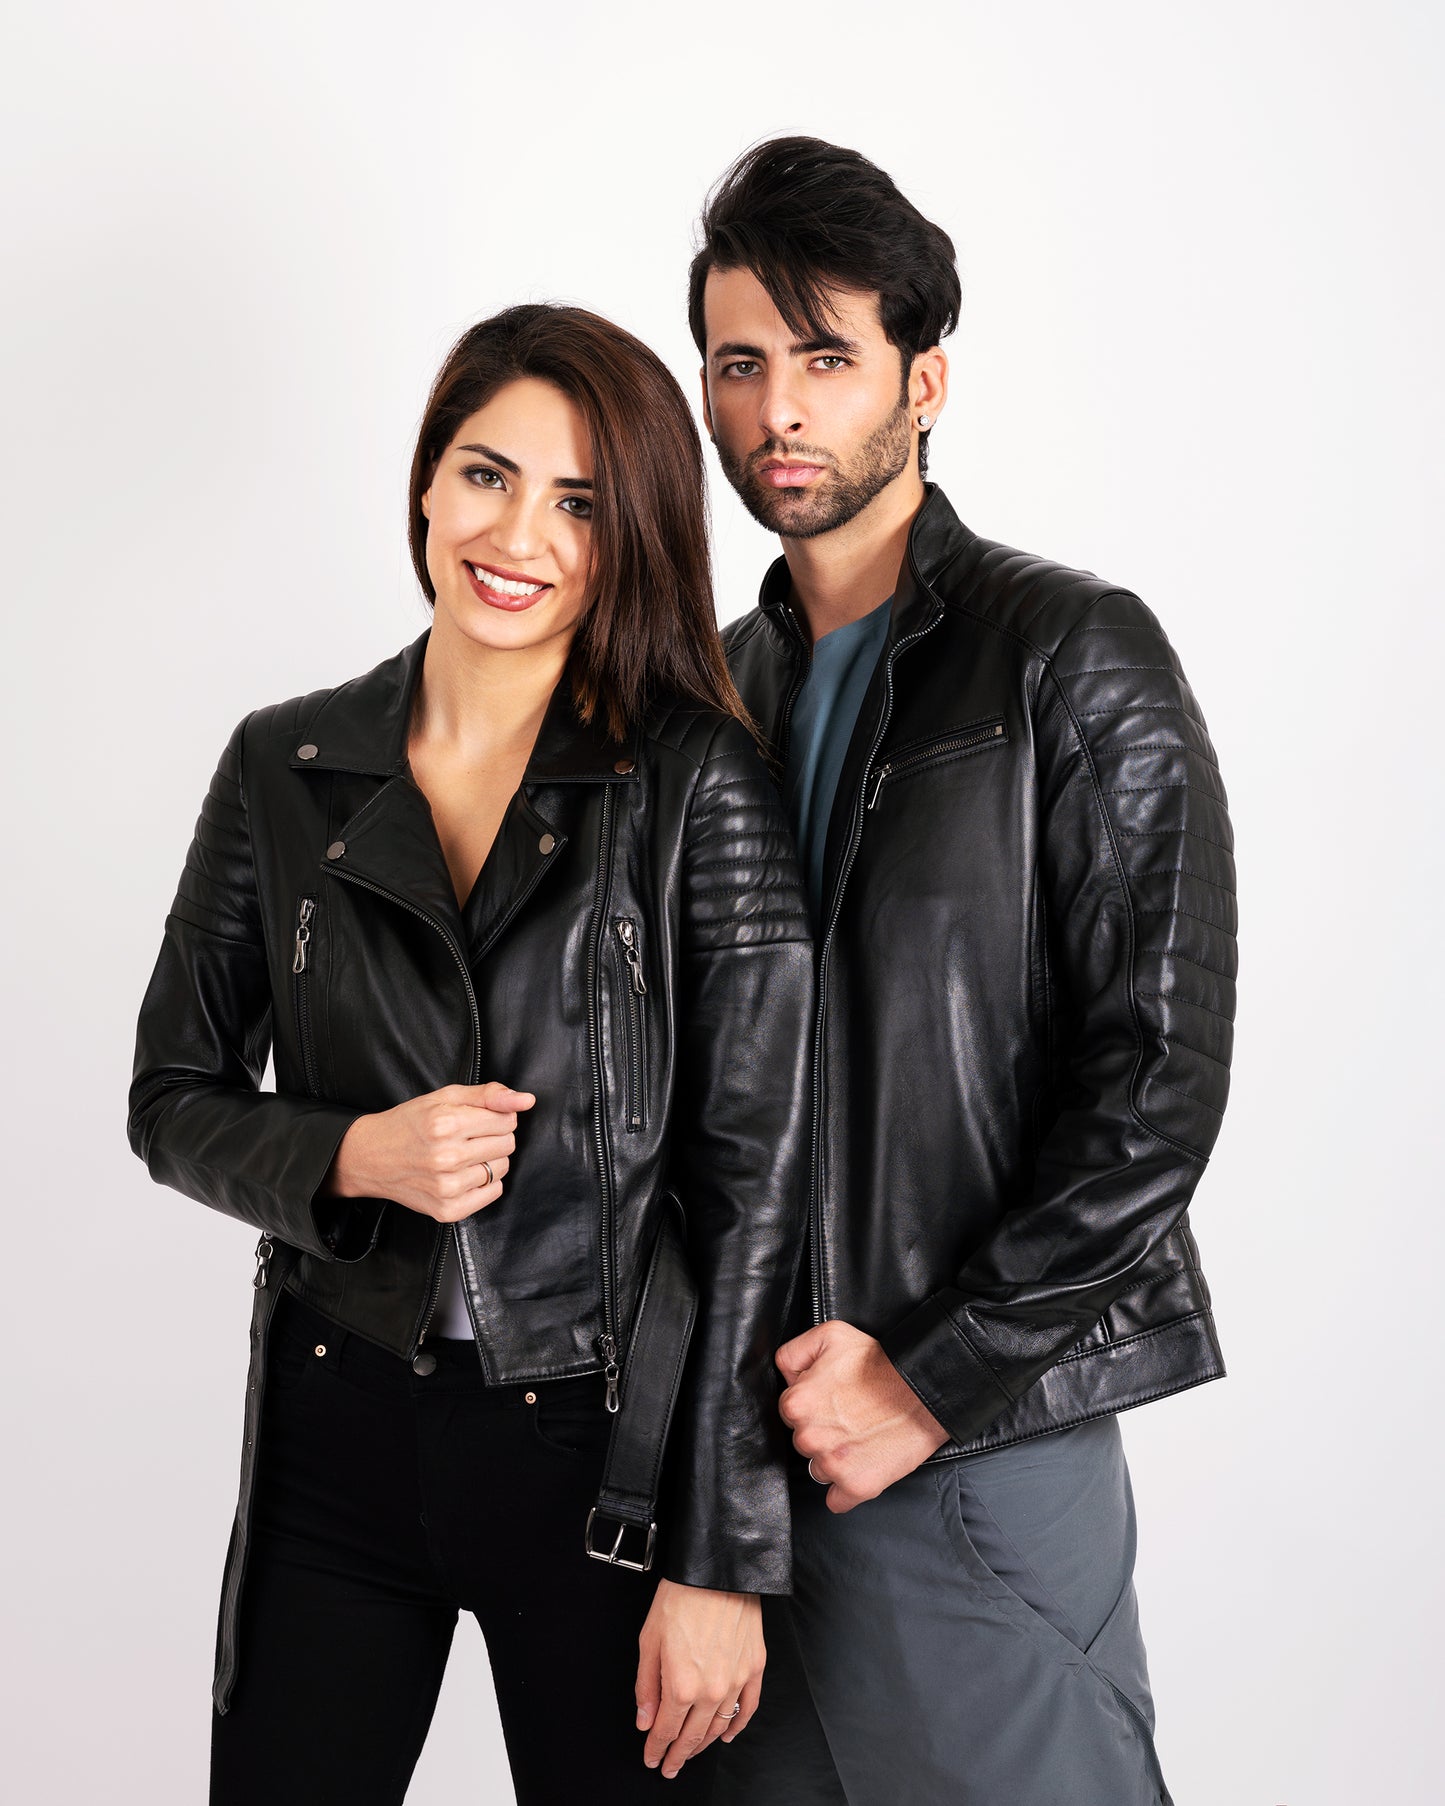 Custom Mr & Mrs Genuine Leather jackets for Bride and Groom Wedding Gift